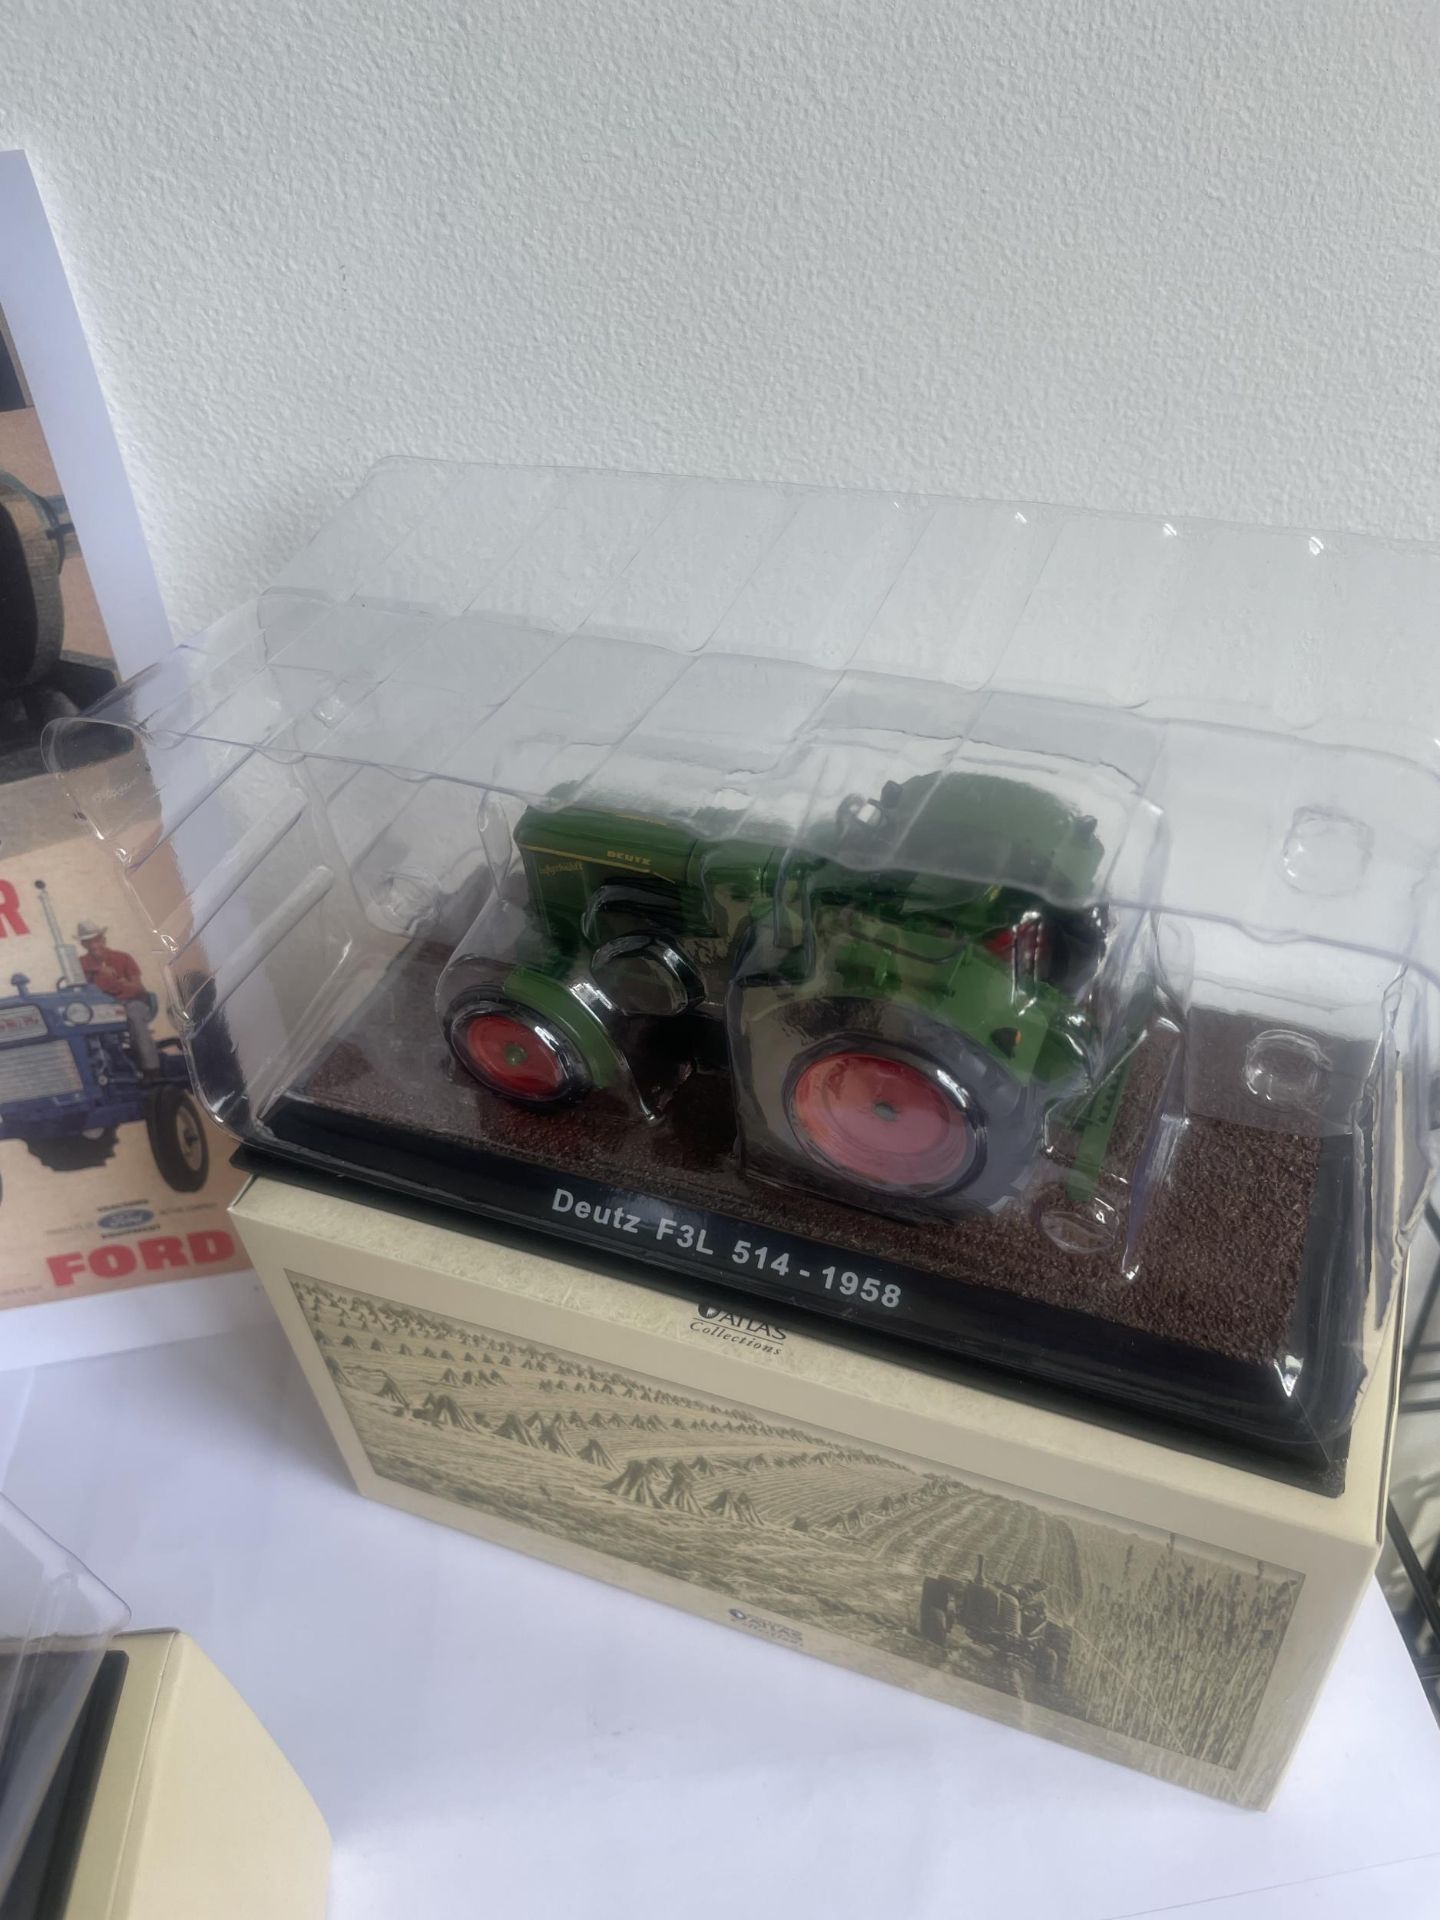 FIVE AS NEW AND BOXED ATLAS MODEL TRACTORS WITH BOOK, DVD AND TWO POSTERS ALL WITH COA - Image 3 of 7